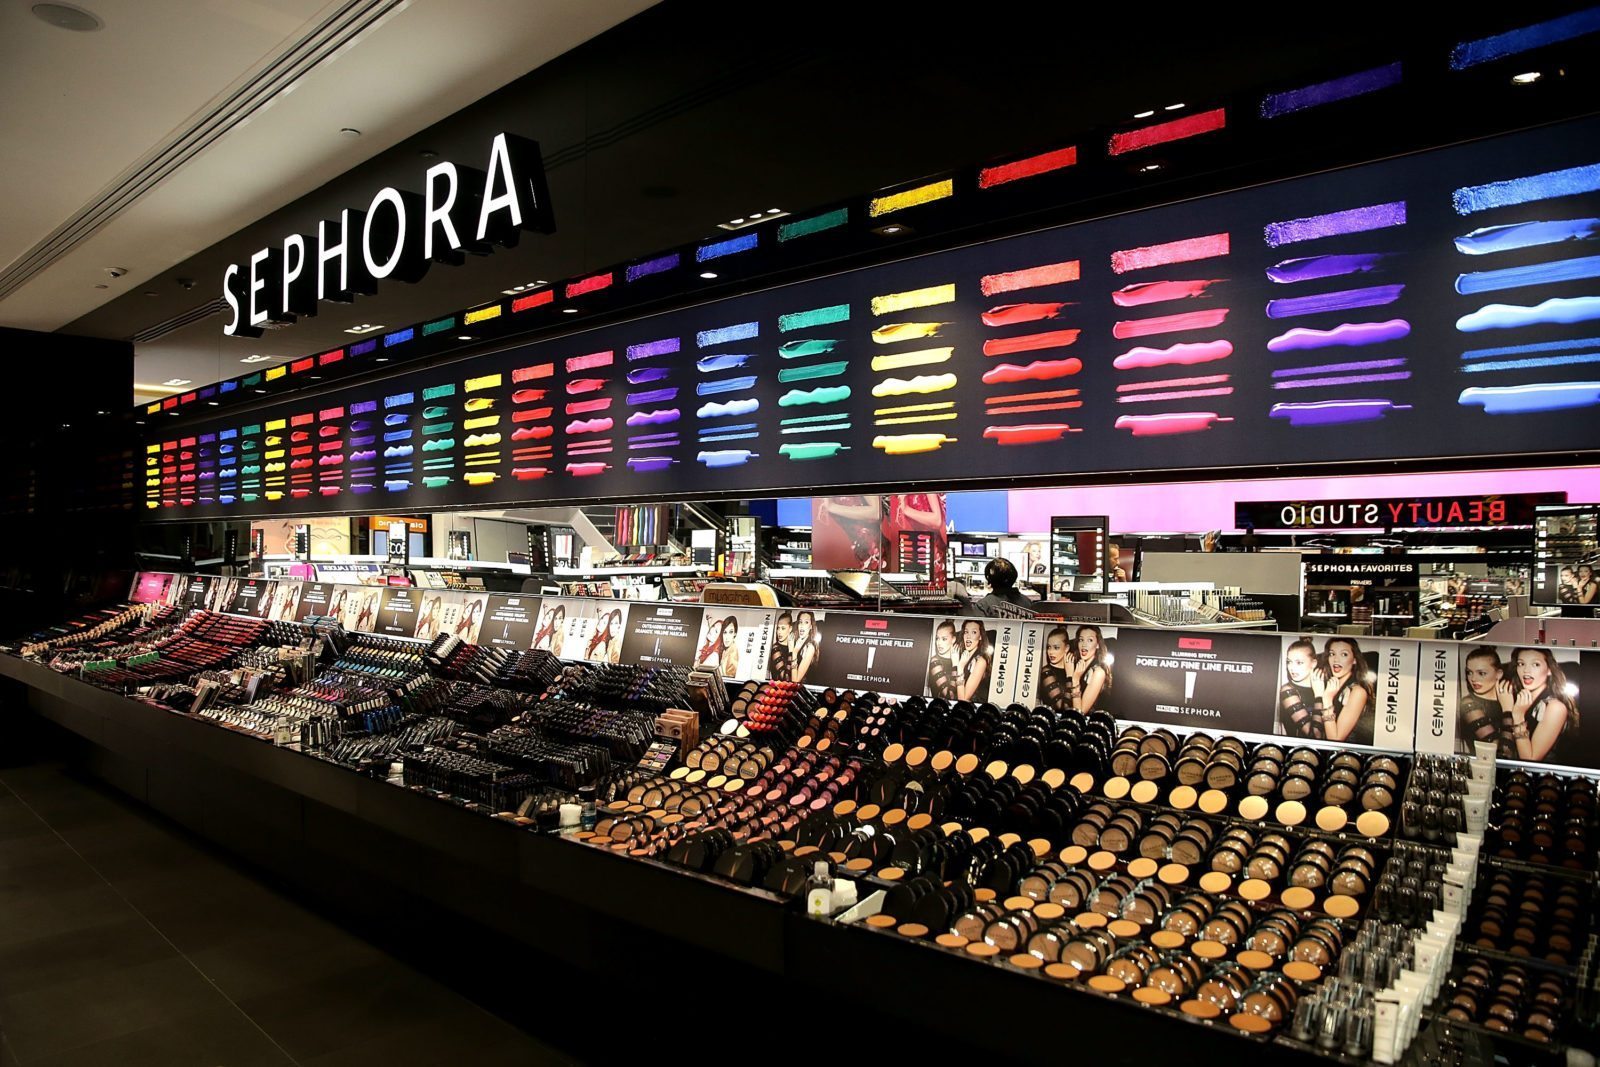 Sephora out makeup classes for trans people by trans PinkNews